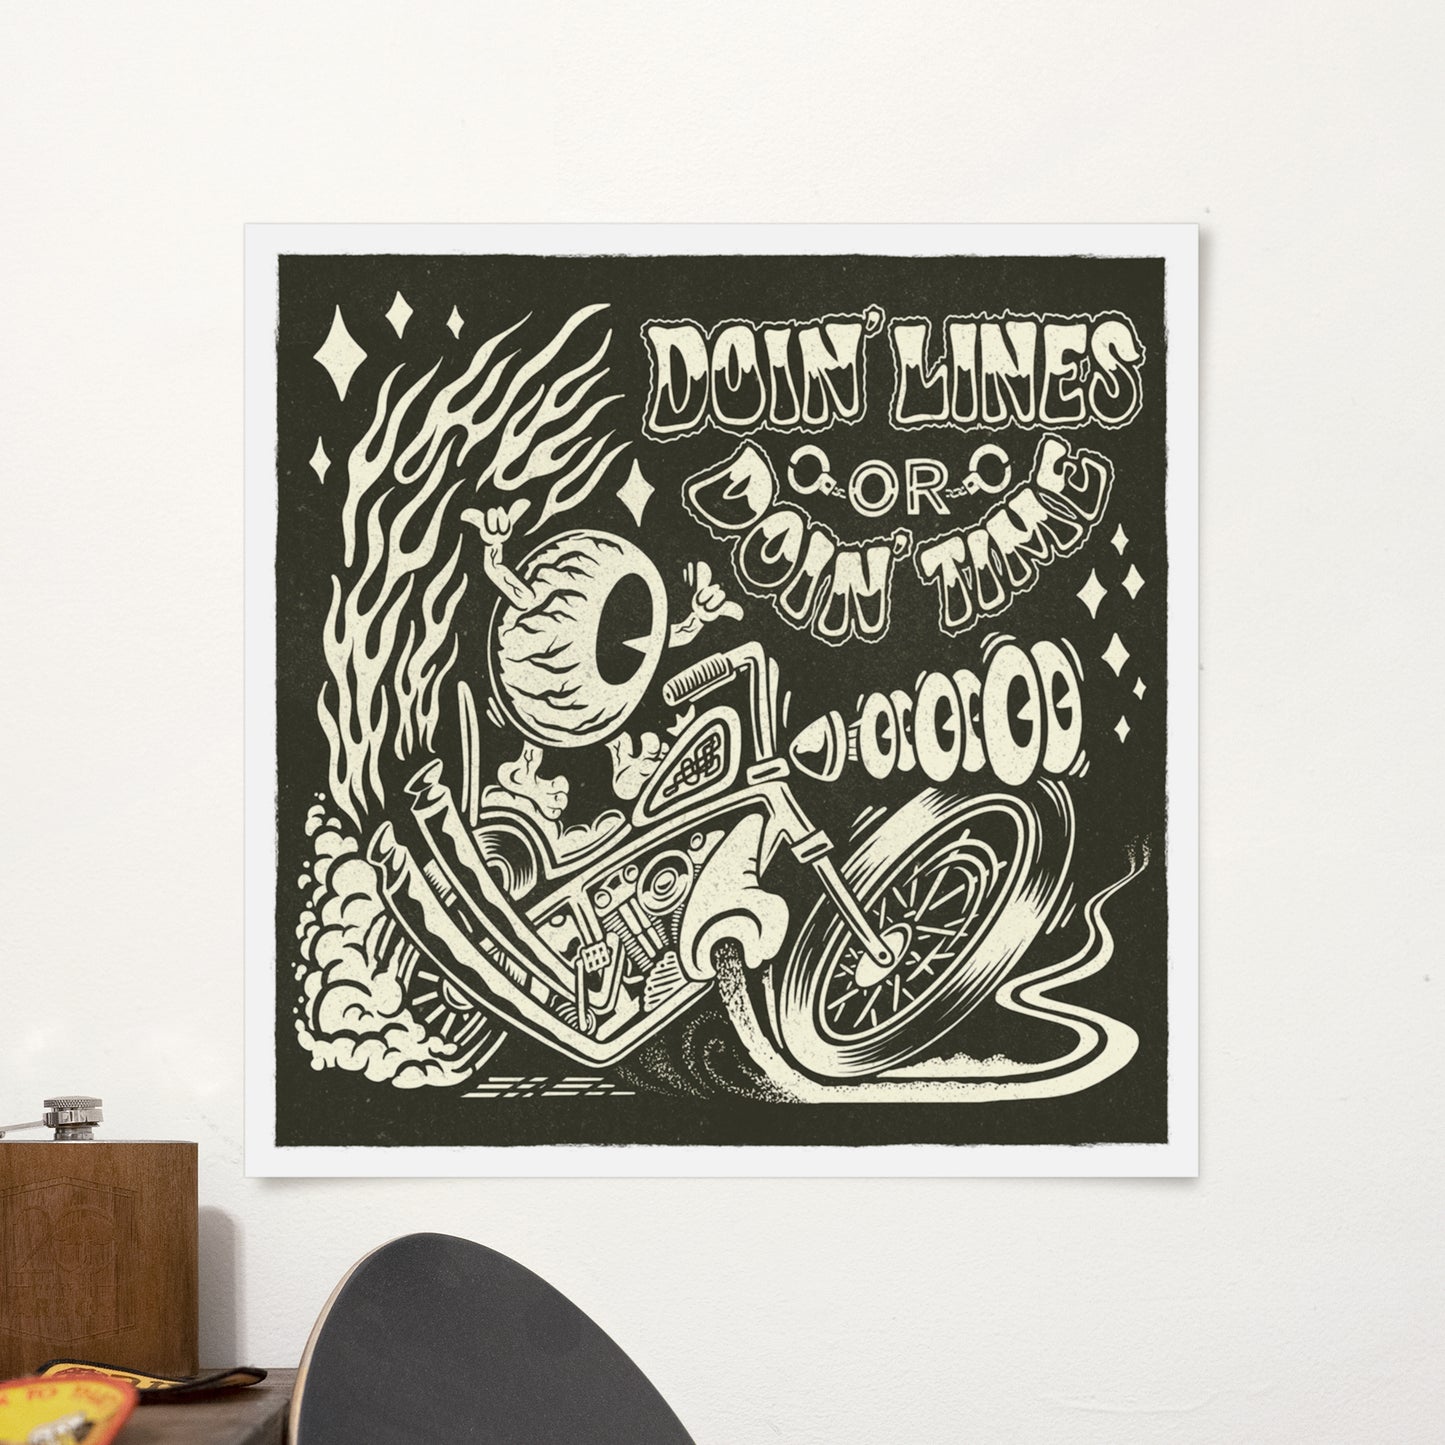 Doin' Lines or Doin' Time - Print